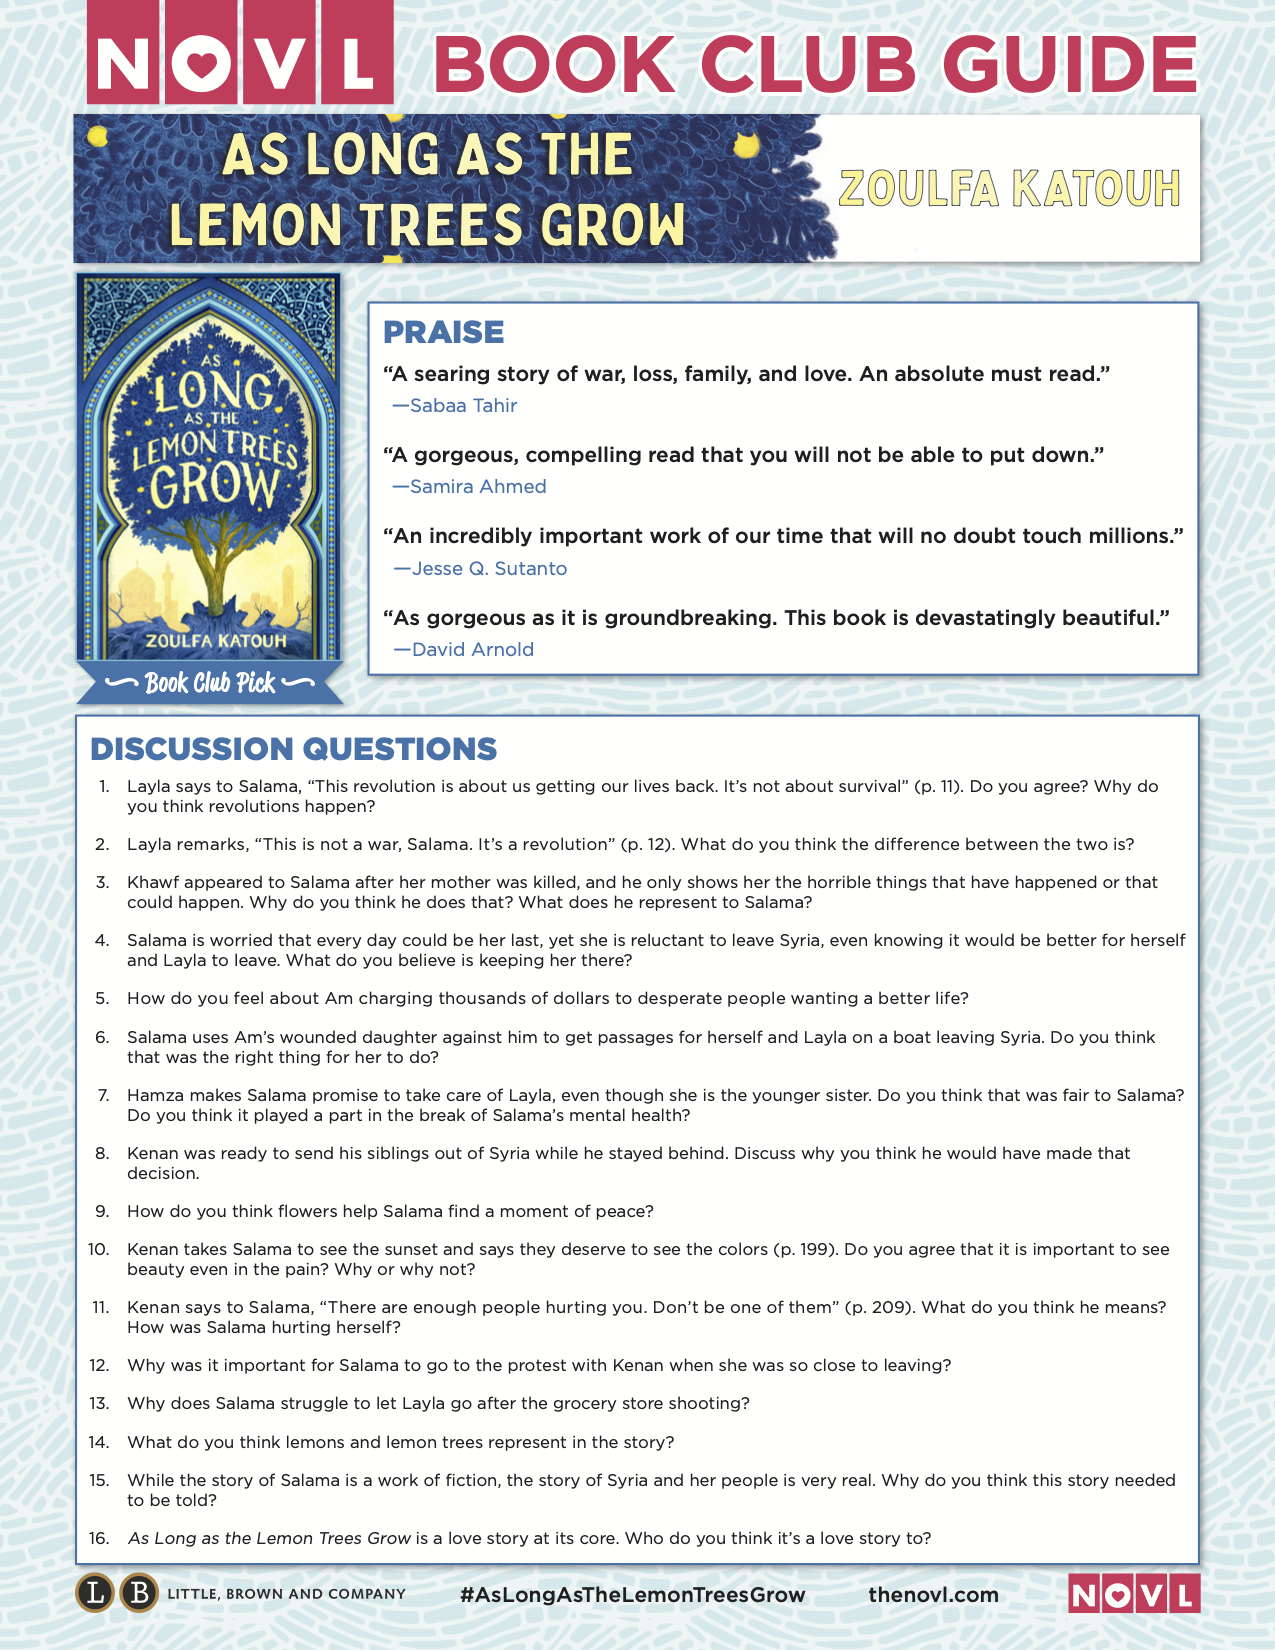 NOVL - preview image of As Long as the Lemon Trees Grow book club guide